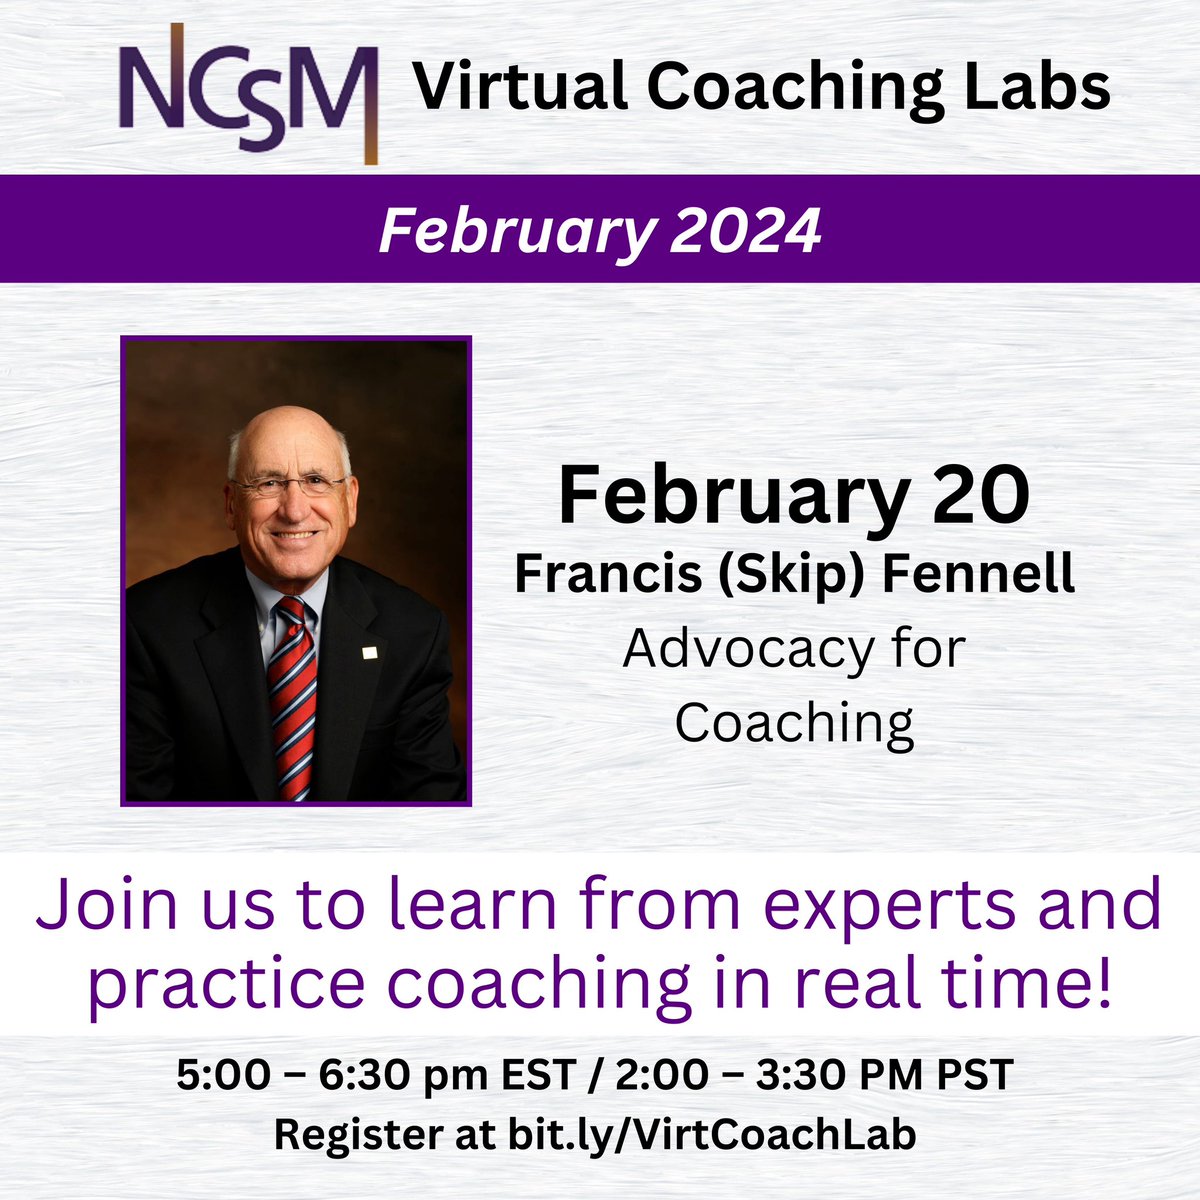 🧡 Thanks to everyone who was able to join us at the last virtual coaching lab! There are still two labs left and there is still time to register. Register now at bit.ly/VirtCoachLab #NCSMBOLD